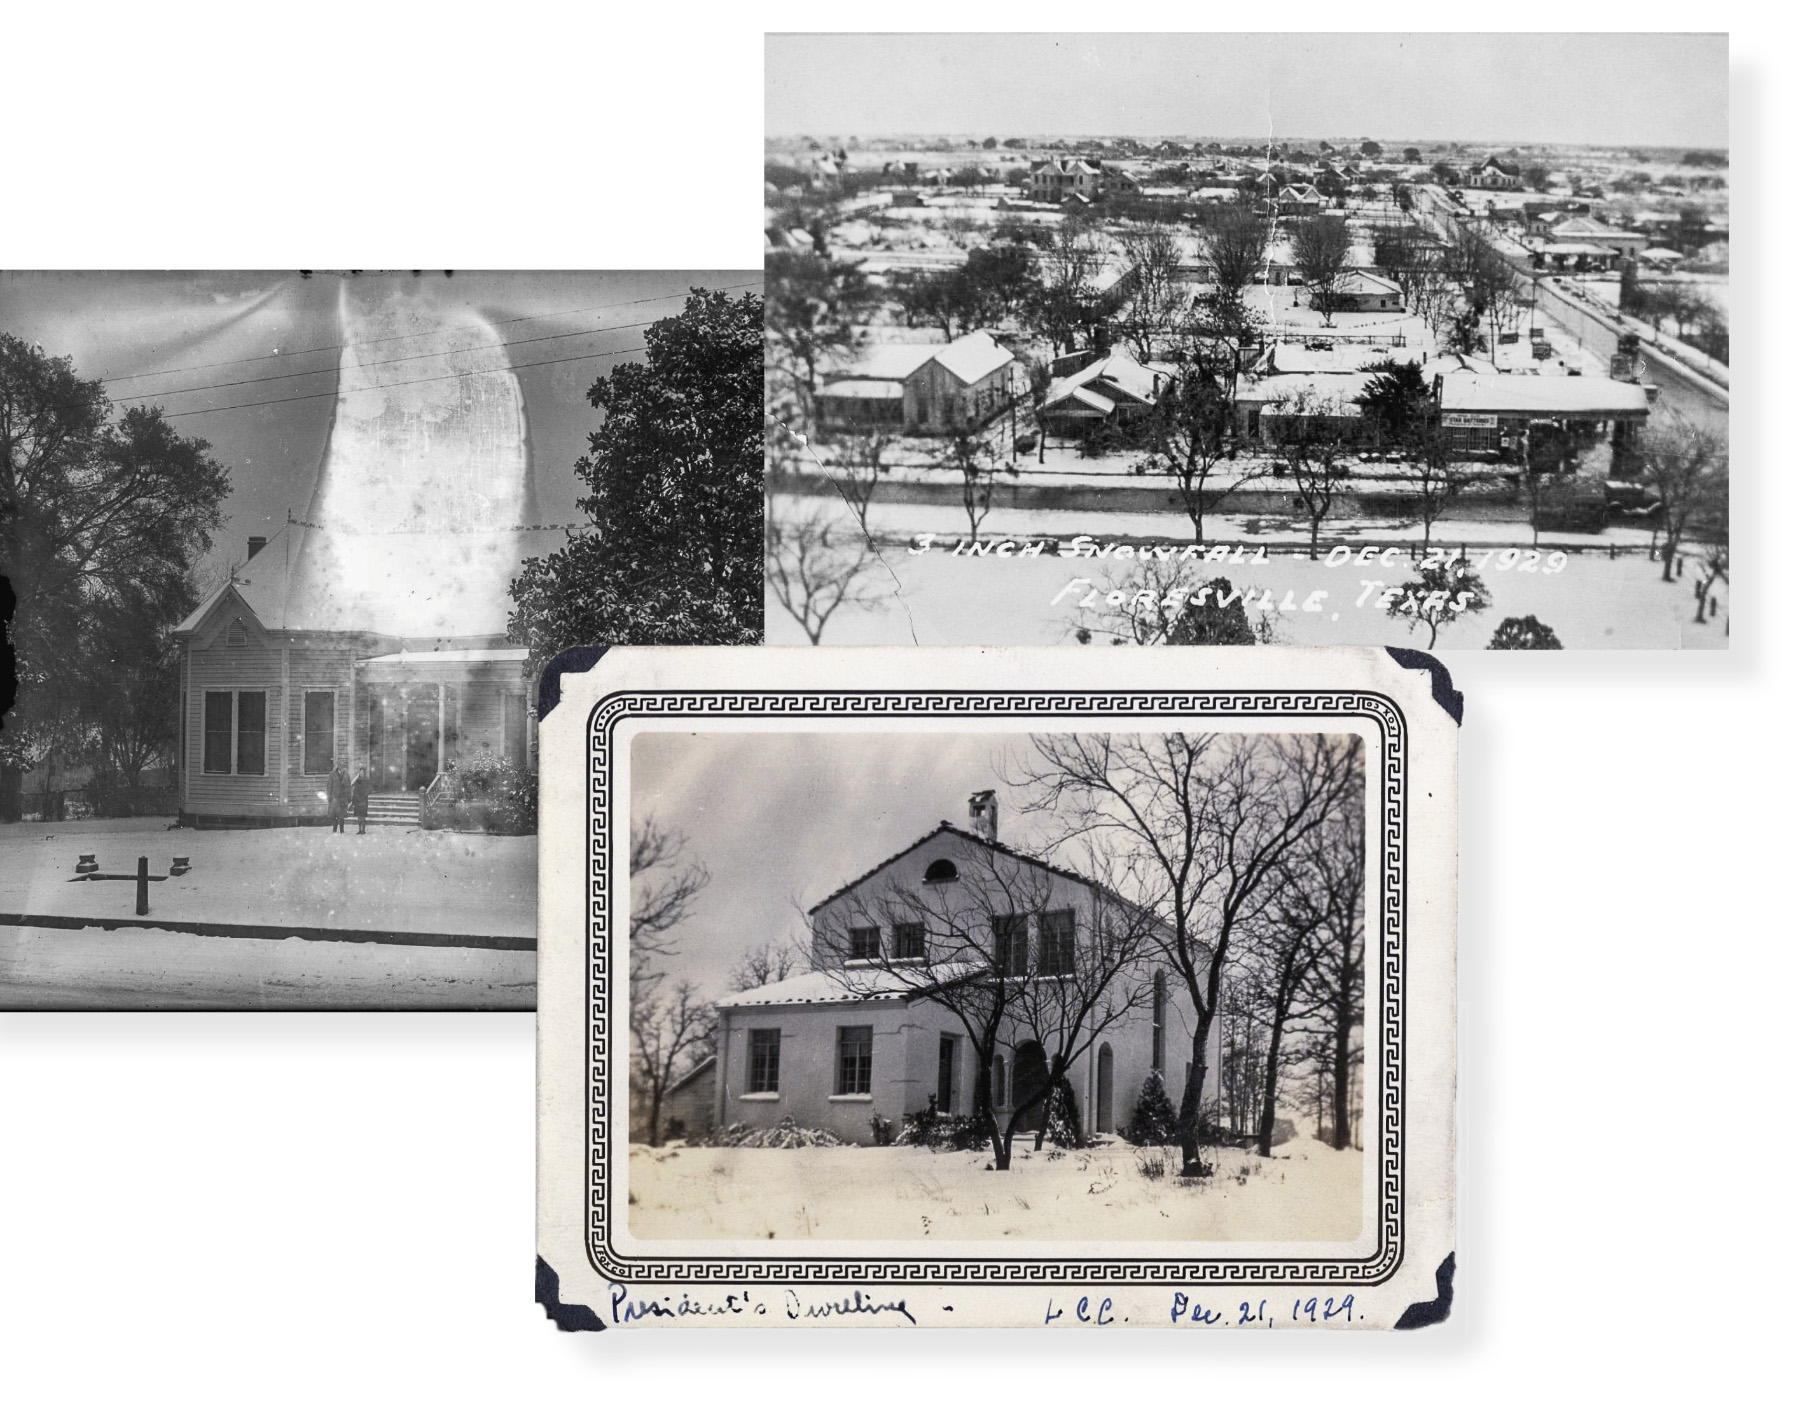 Historical photos of Texas towns blanketed in snow